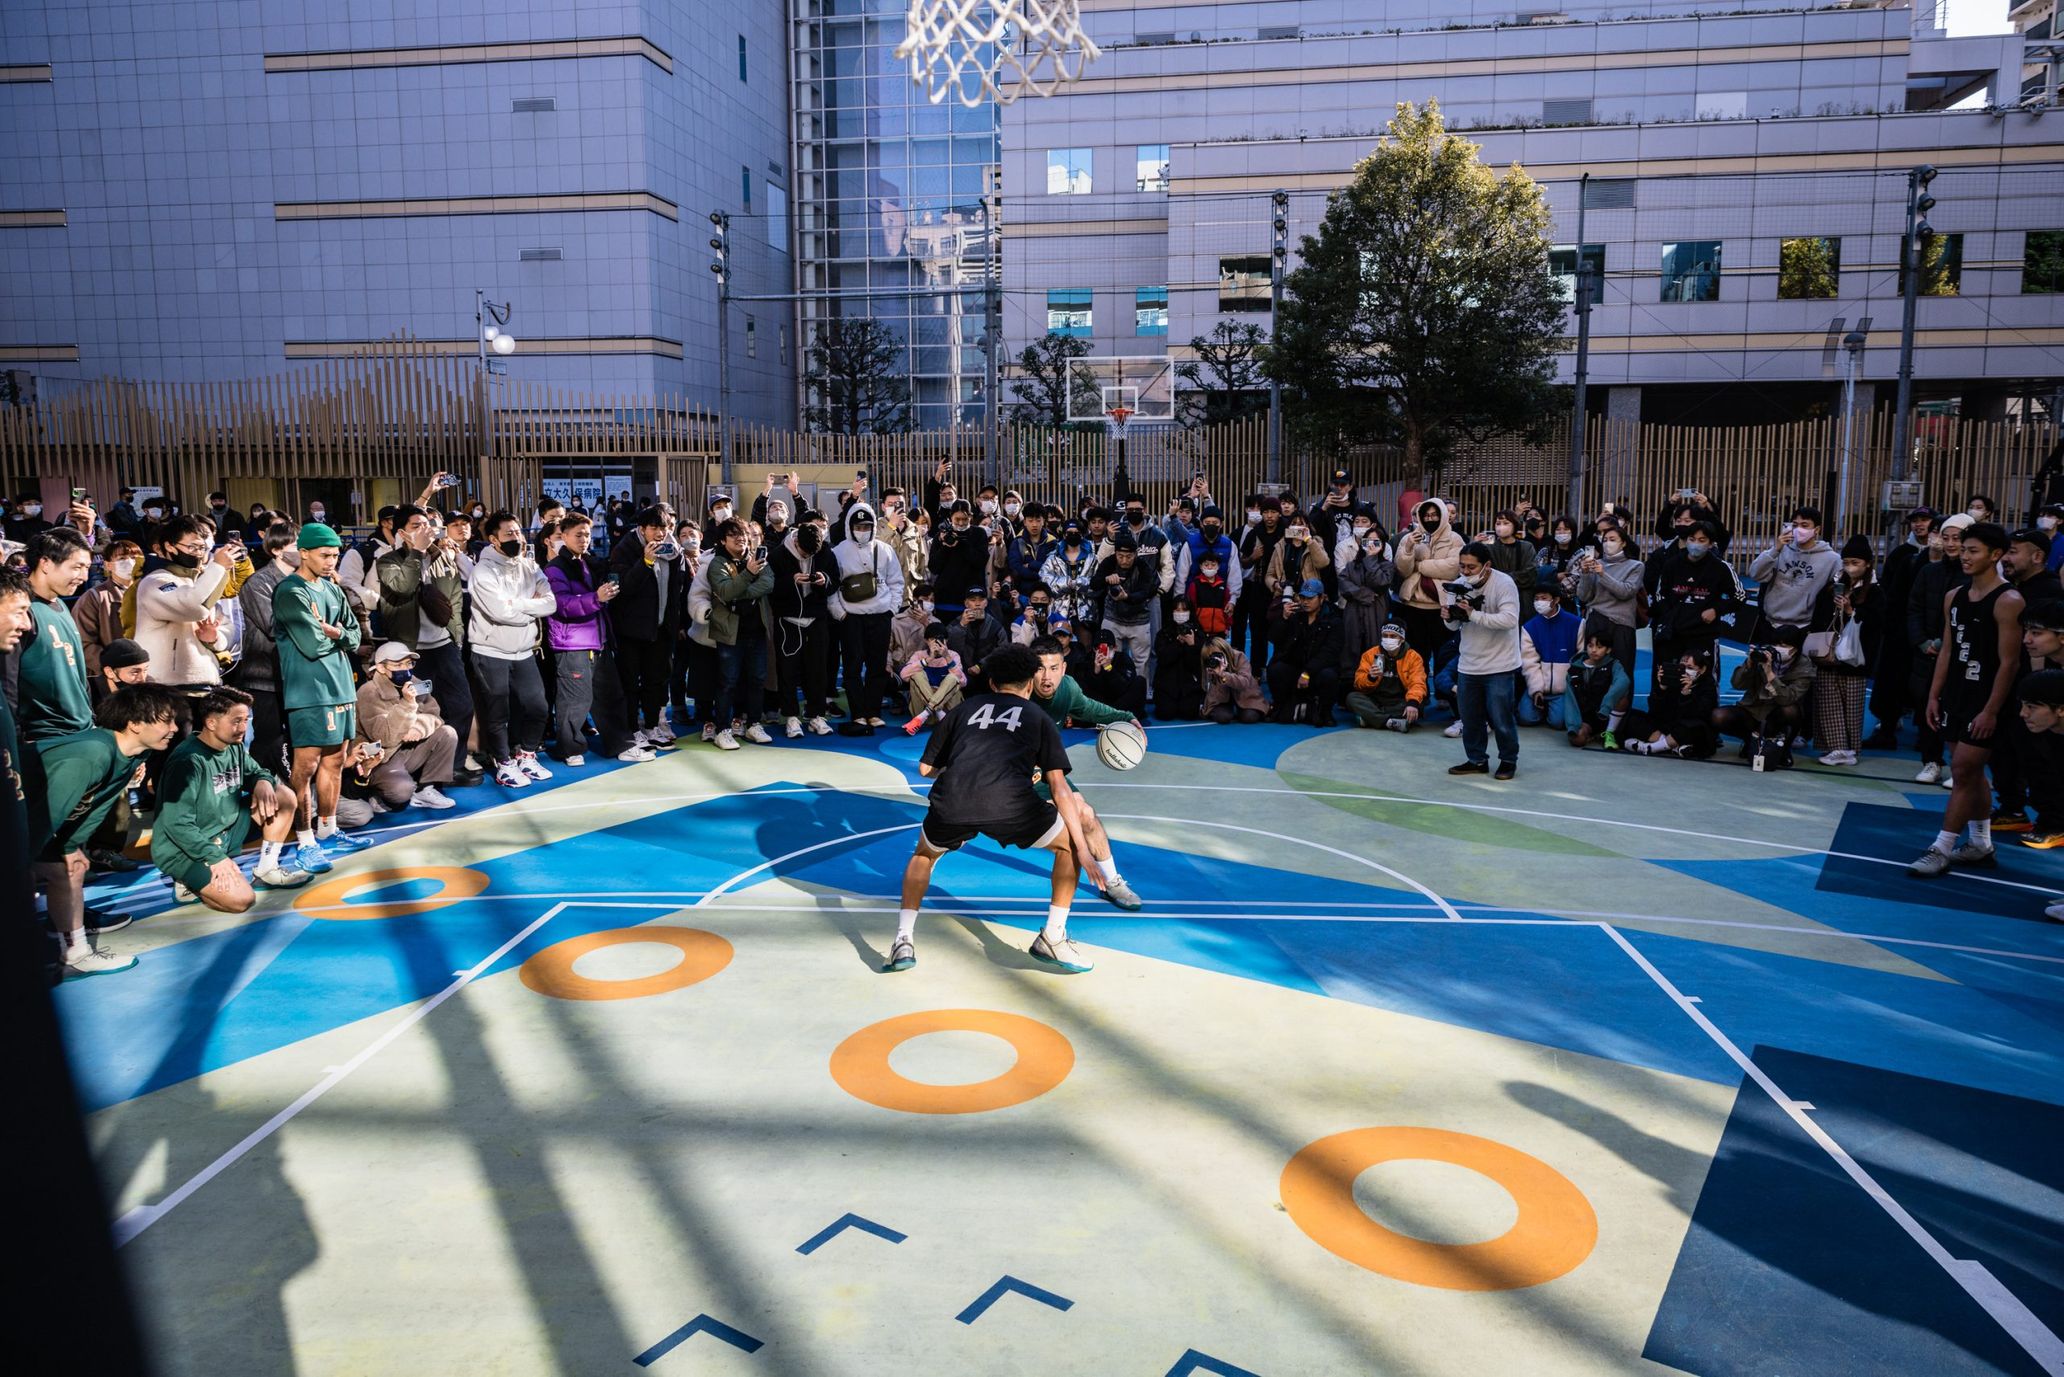 A shot from the photo book unveiling pick-up event at the Art Court in Okubo Park in Shinjuku ward, Tokyo. This was the first Asian project for both community outreach programs of the 2K Foundation of America and NBA superstar Kevin Durant's charity Foundation (KDCF), where the area was renovated into an Art Court. It was created by artist FATE and the go parkey Association. TANA has shared many journeys through streetball with the representative, AB.